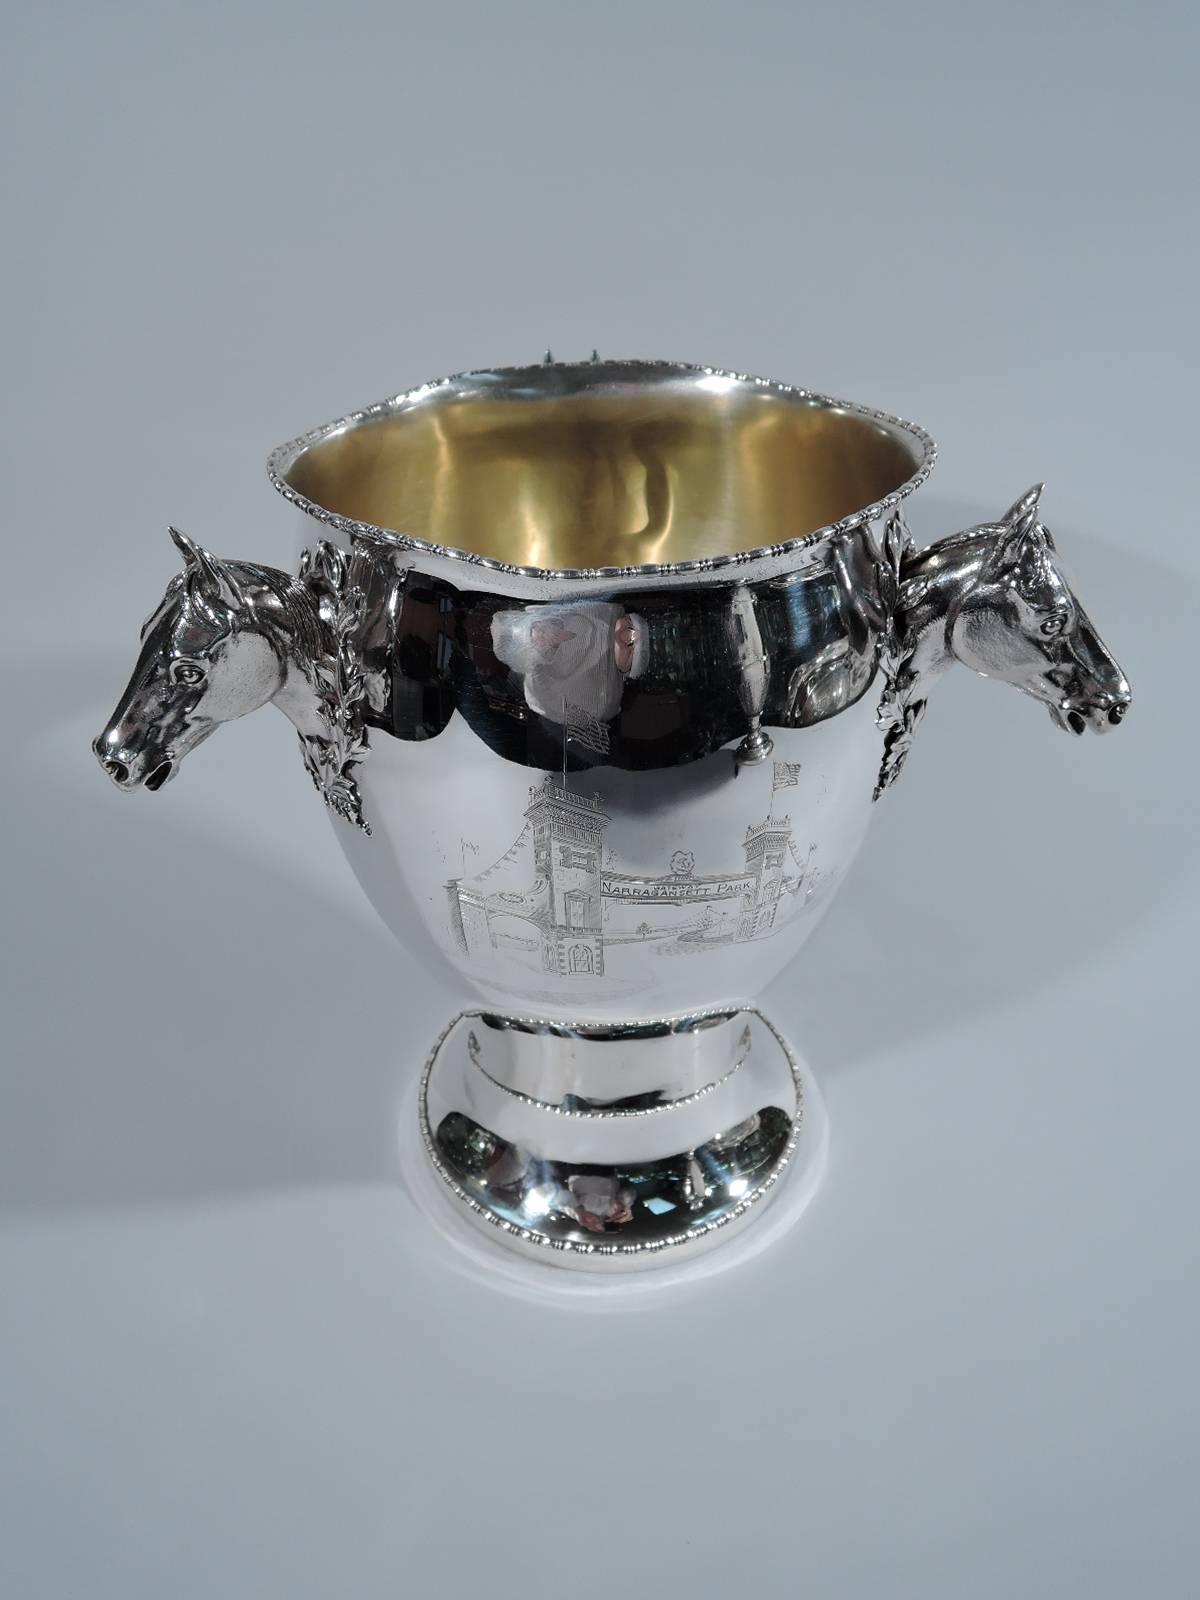 American sterling silver trophy cup. Baluster body with three cast horse heads, each wearing a winner’s wreath. Bead-and-reel ornament on rim and foot.
Pictorial engraving of Narragansett Park Gateway. Also: “Free for all trot to wagon won by